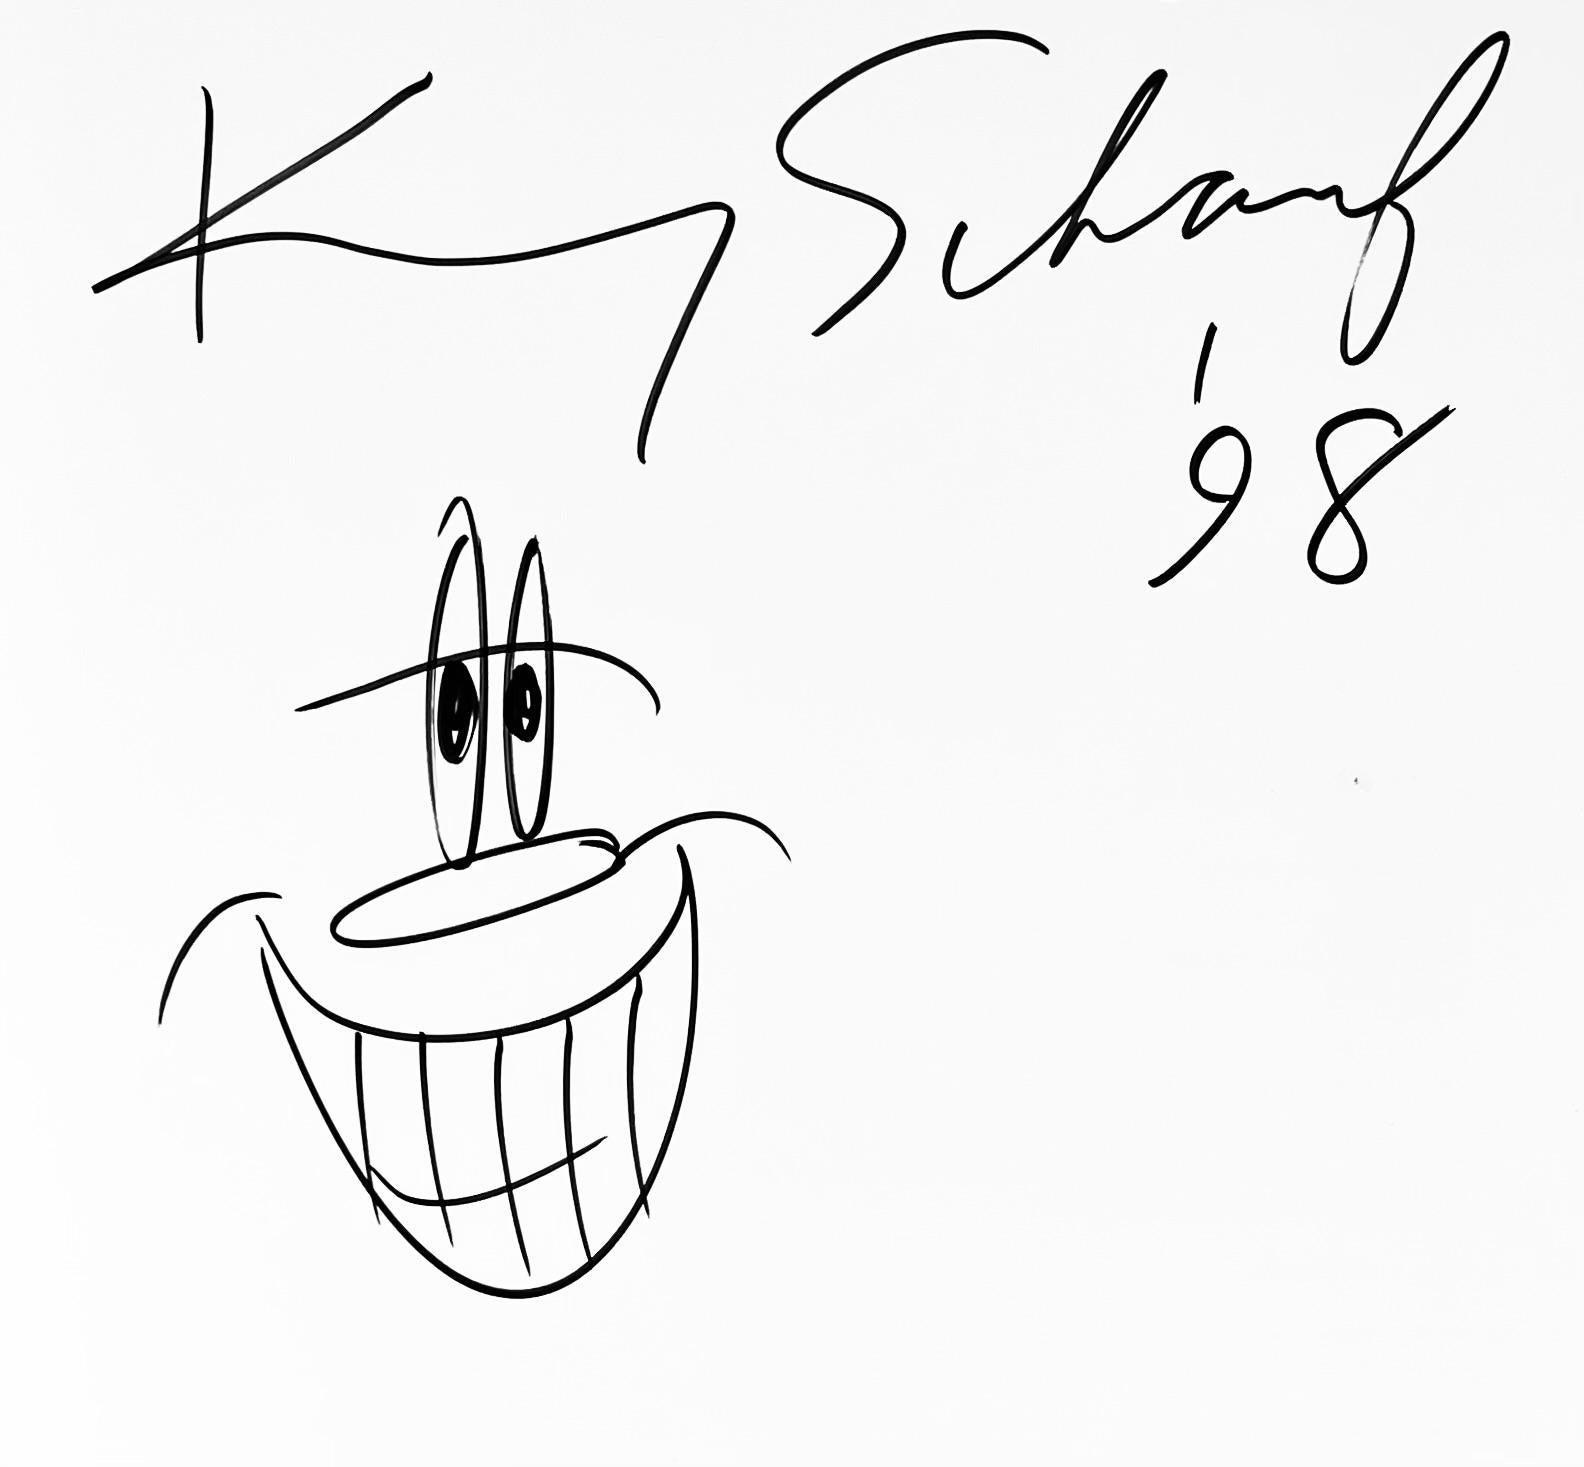 Kenny Scharf drawing 1998 (book drawing):
1990's Jean-Michel Basquiat, Keith Haring, Kenny Scharf exhibition catalogue featuring a signed & inscribed Kenny Scharf drawing. Further background: 

In 1997, parallel to the Keith Haring retrospective at